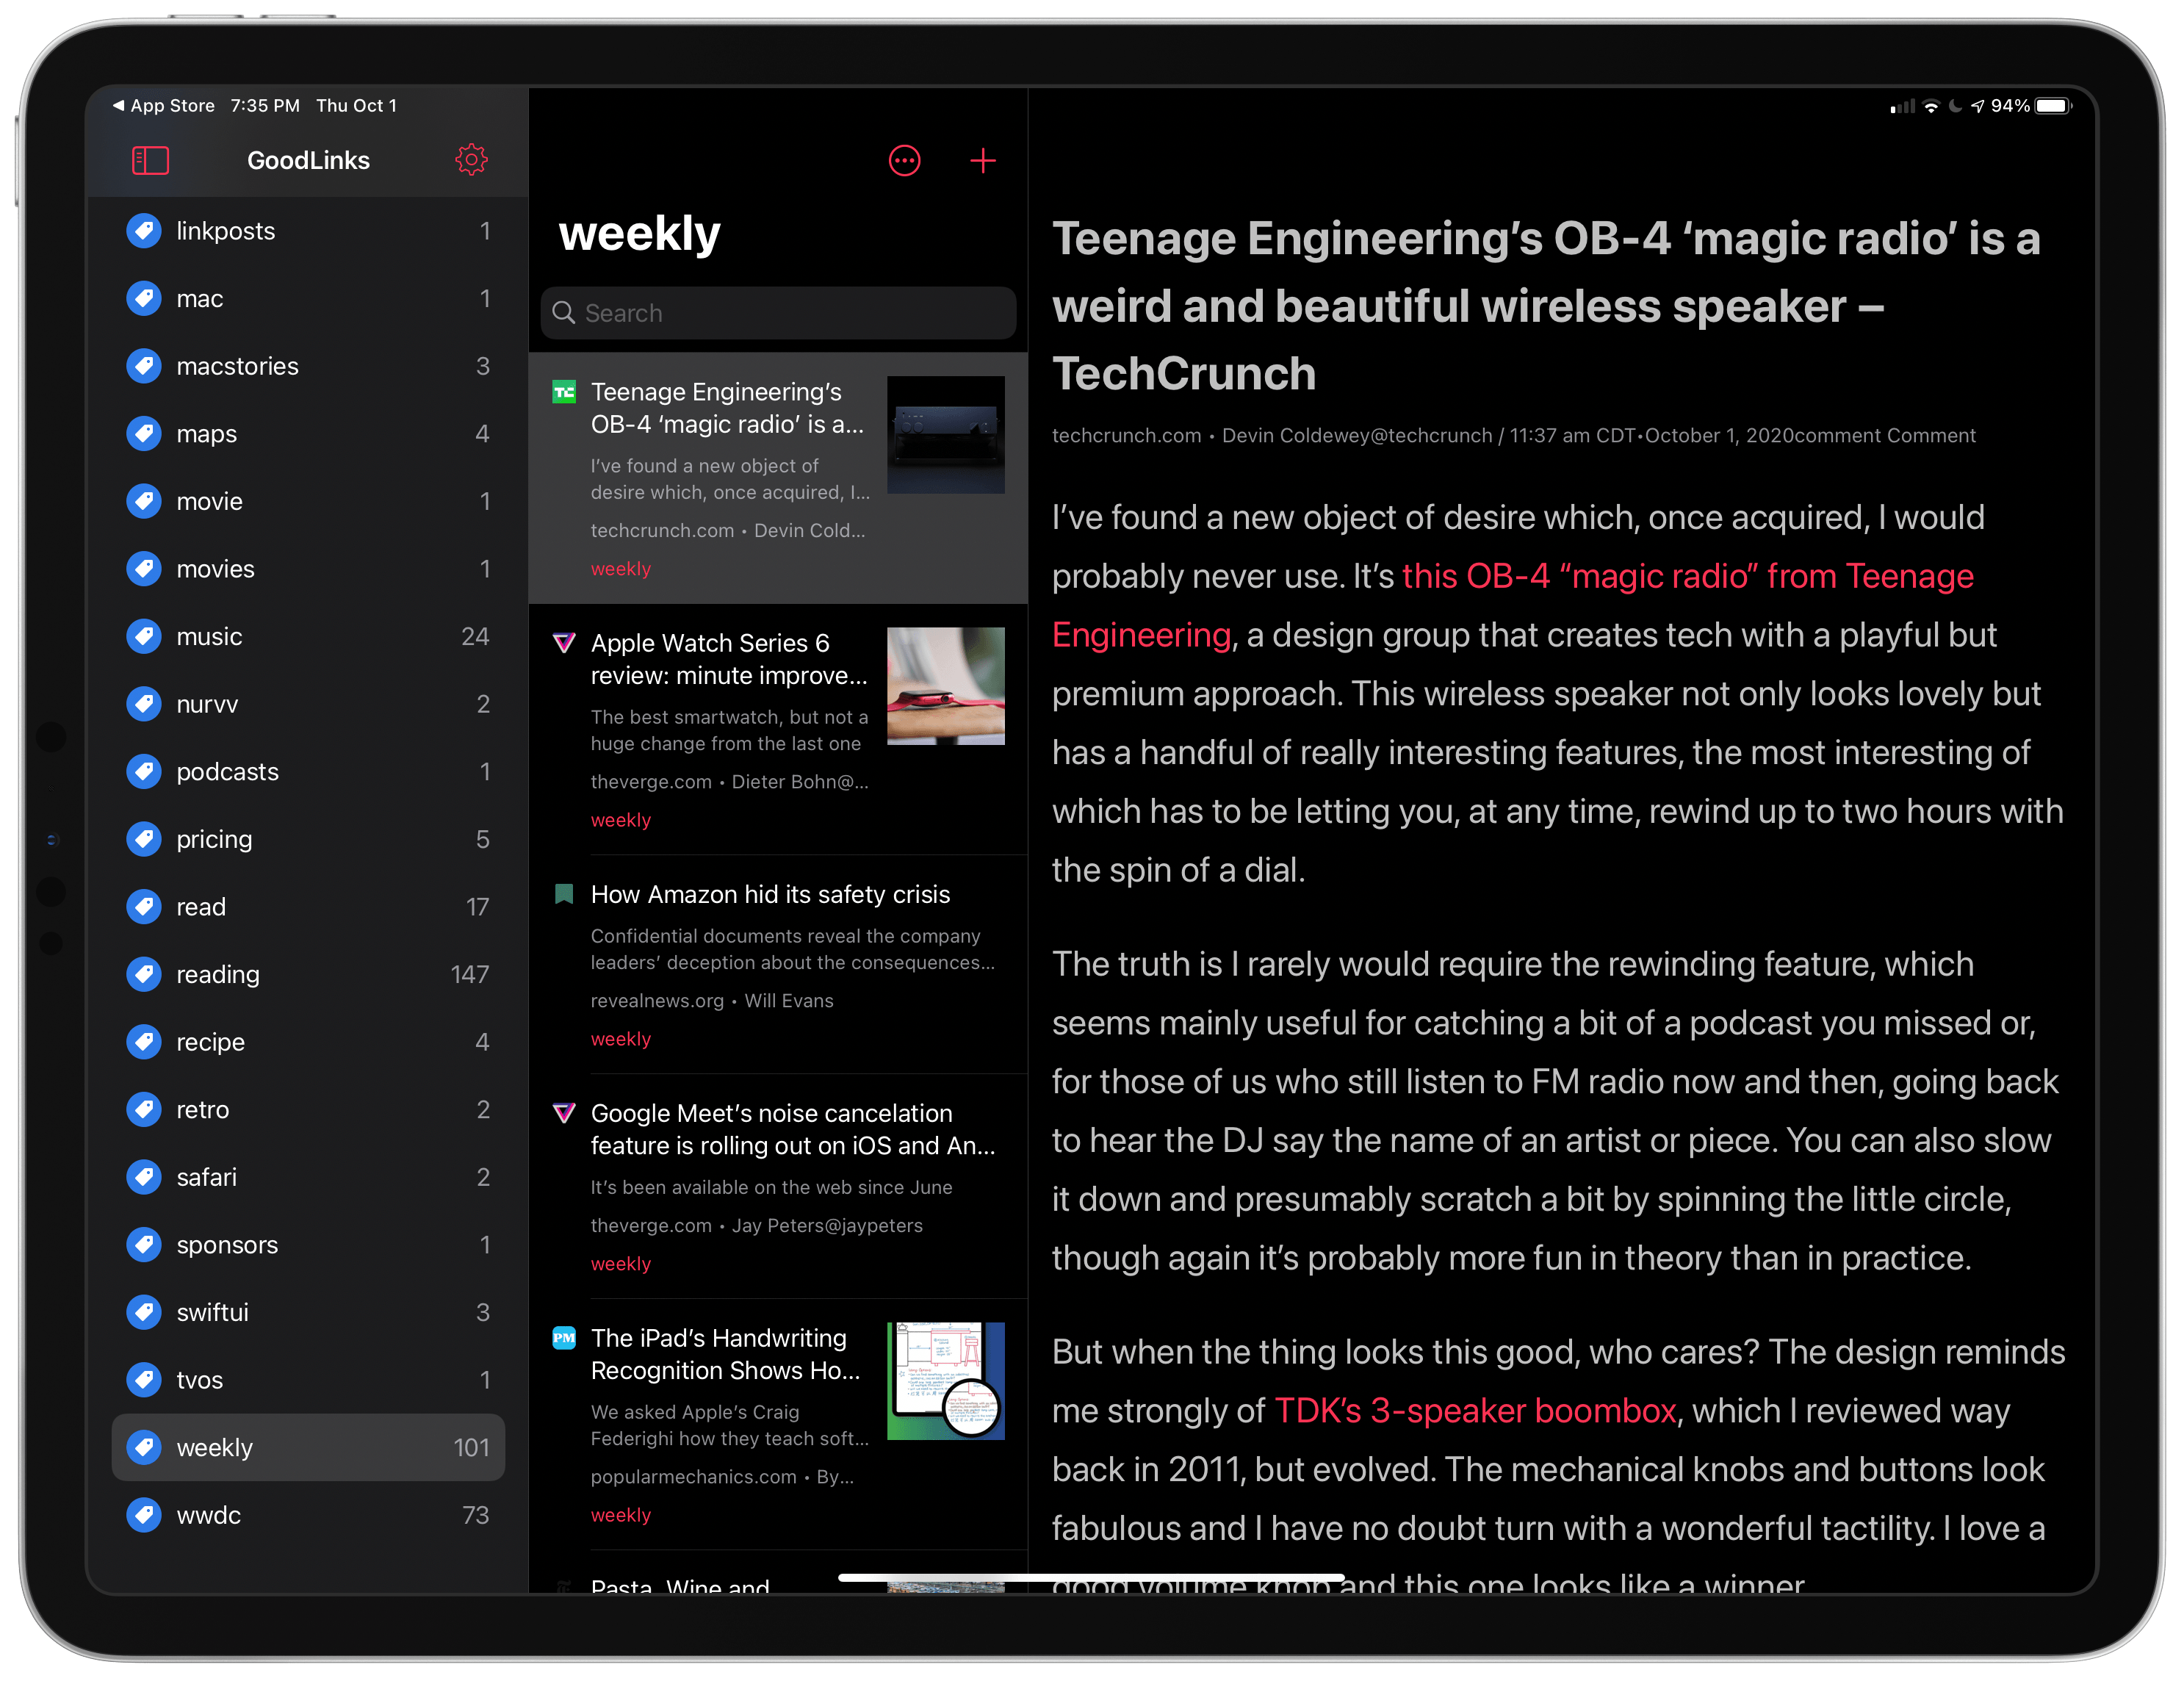 Tags in GoodLinks' sidebar can be expanded.